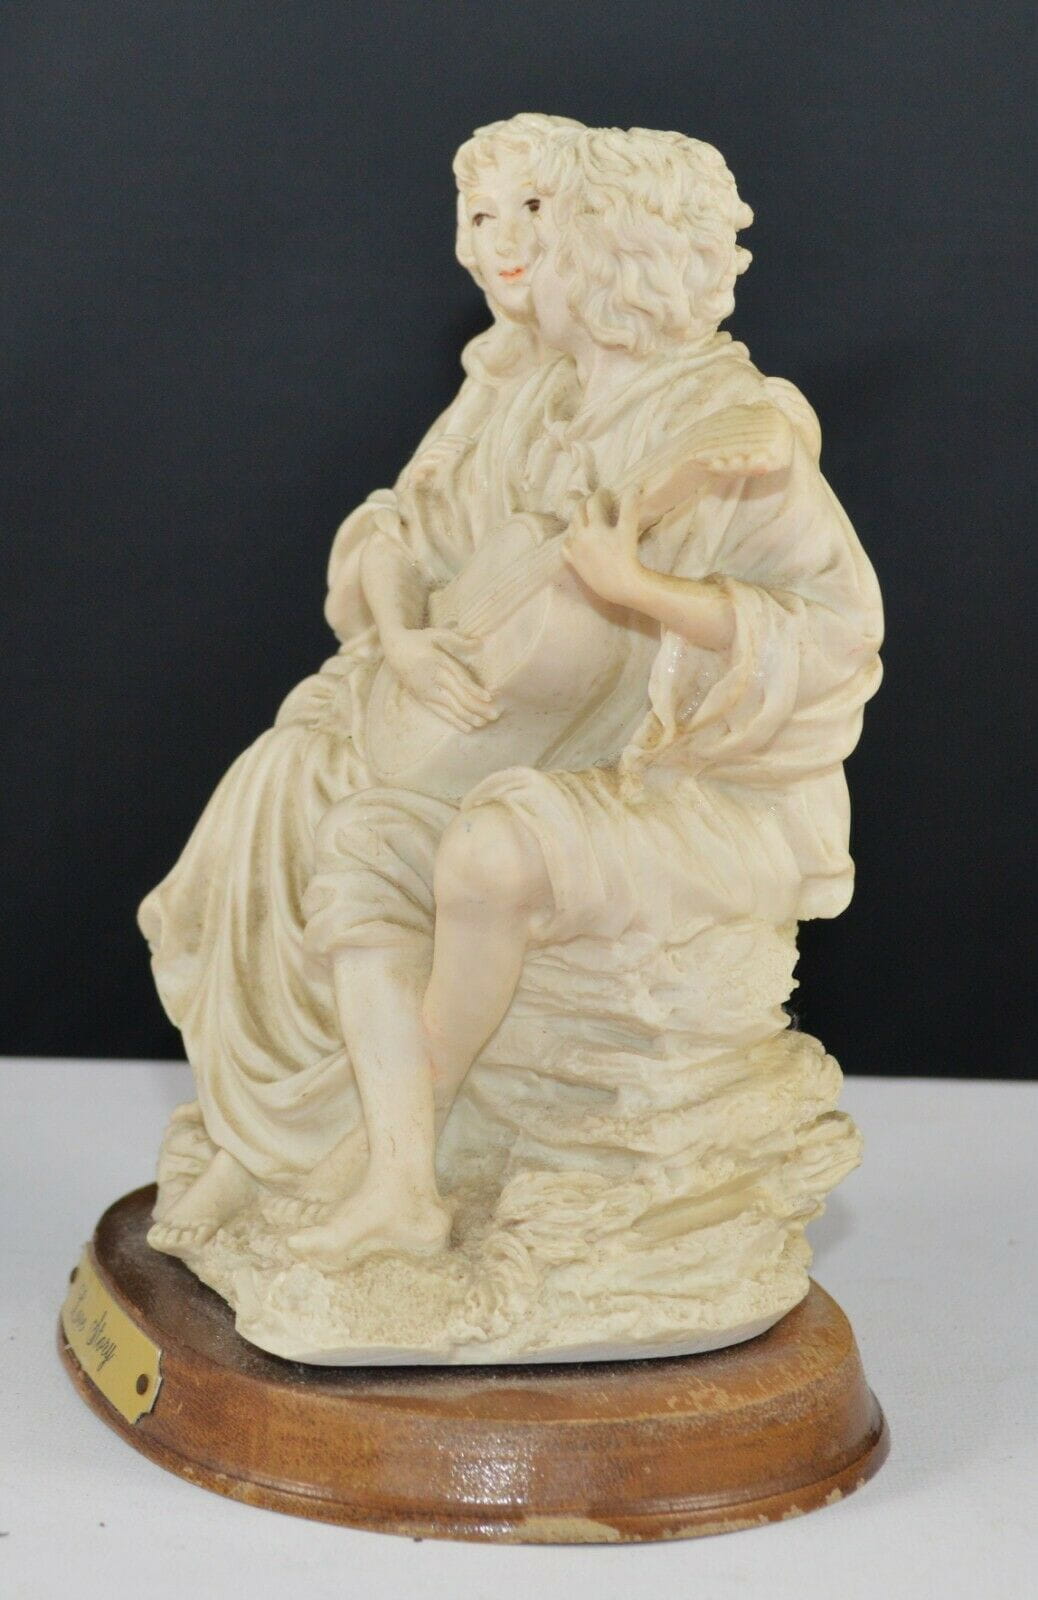 DECORATIVE FIGURINE MAN AND LADY FIGURINE ON WOODEN BASE TITLED LOVE STORY(PREVIOUSLY OWNED) GOOD CONDITION - TMD167207